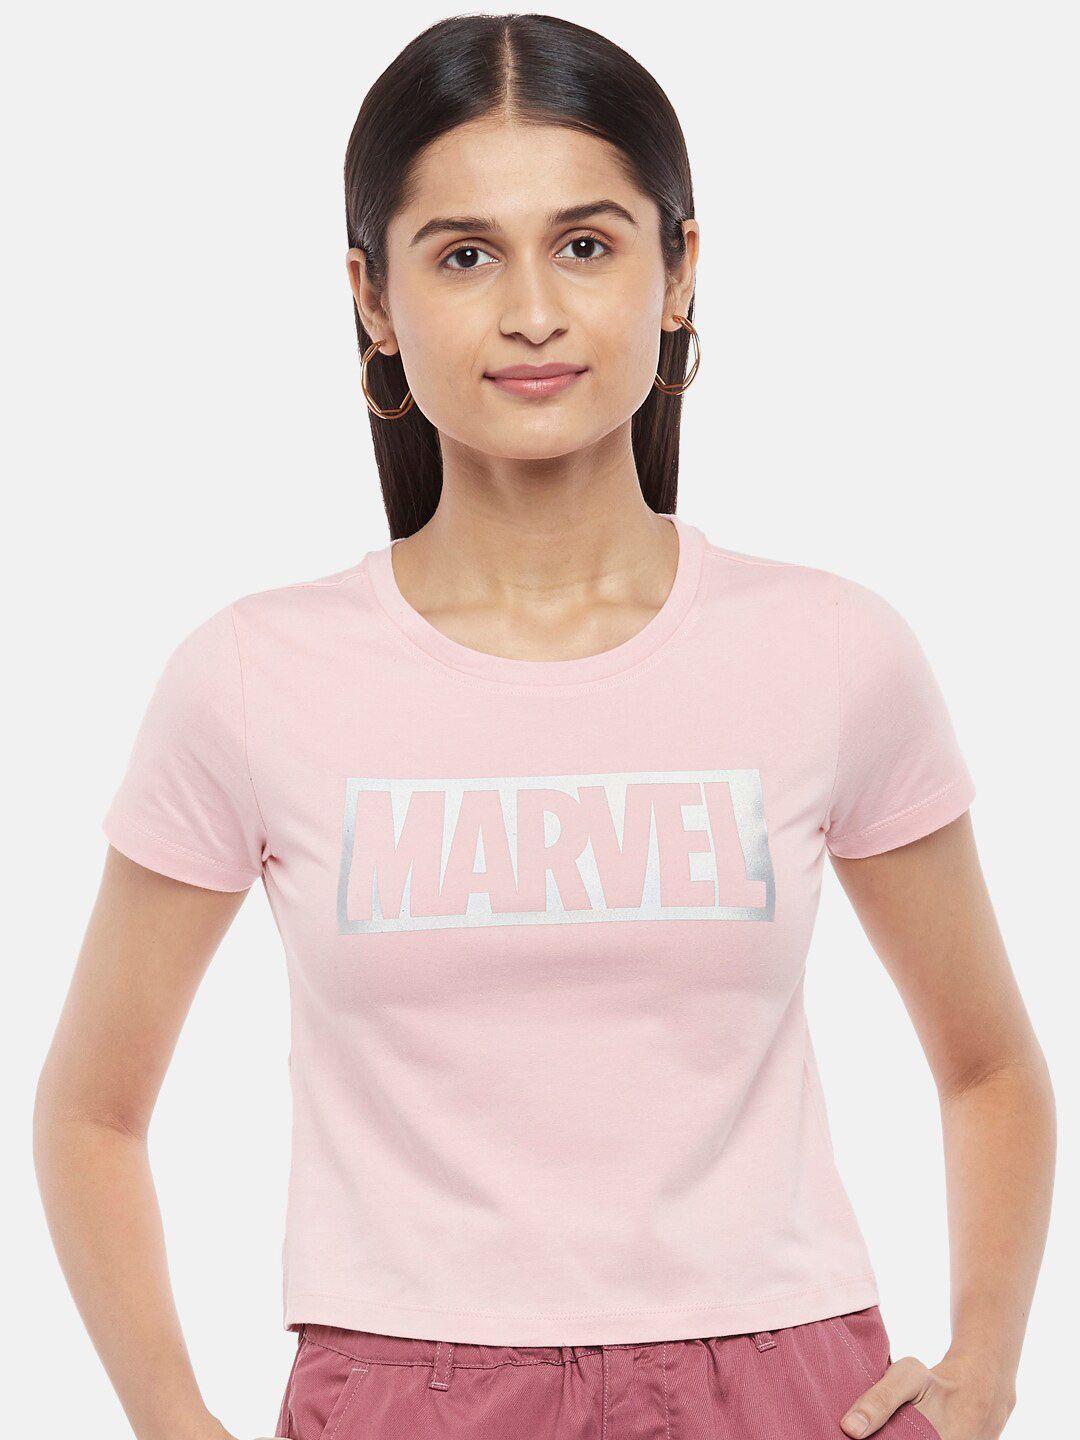 honey-by-pantaloons-marvel-printed-cotton-crop-top